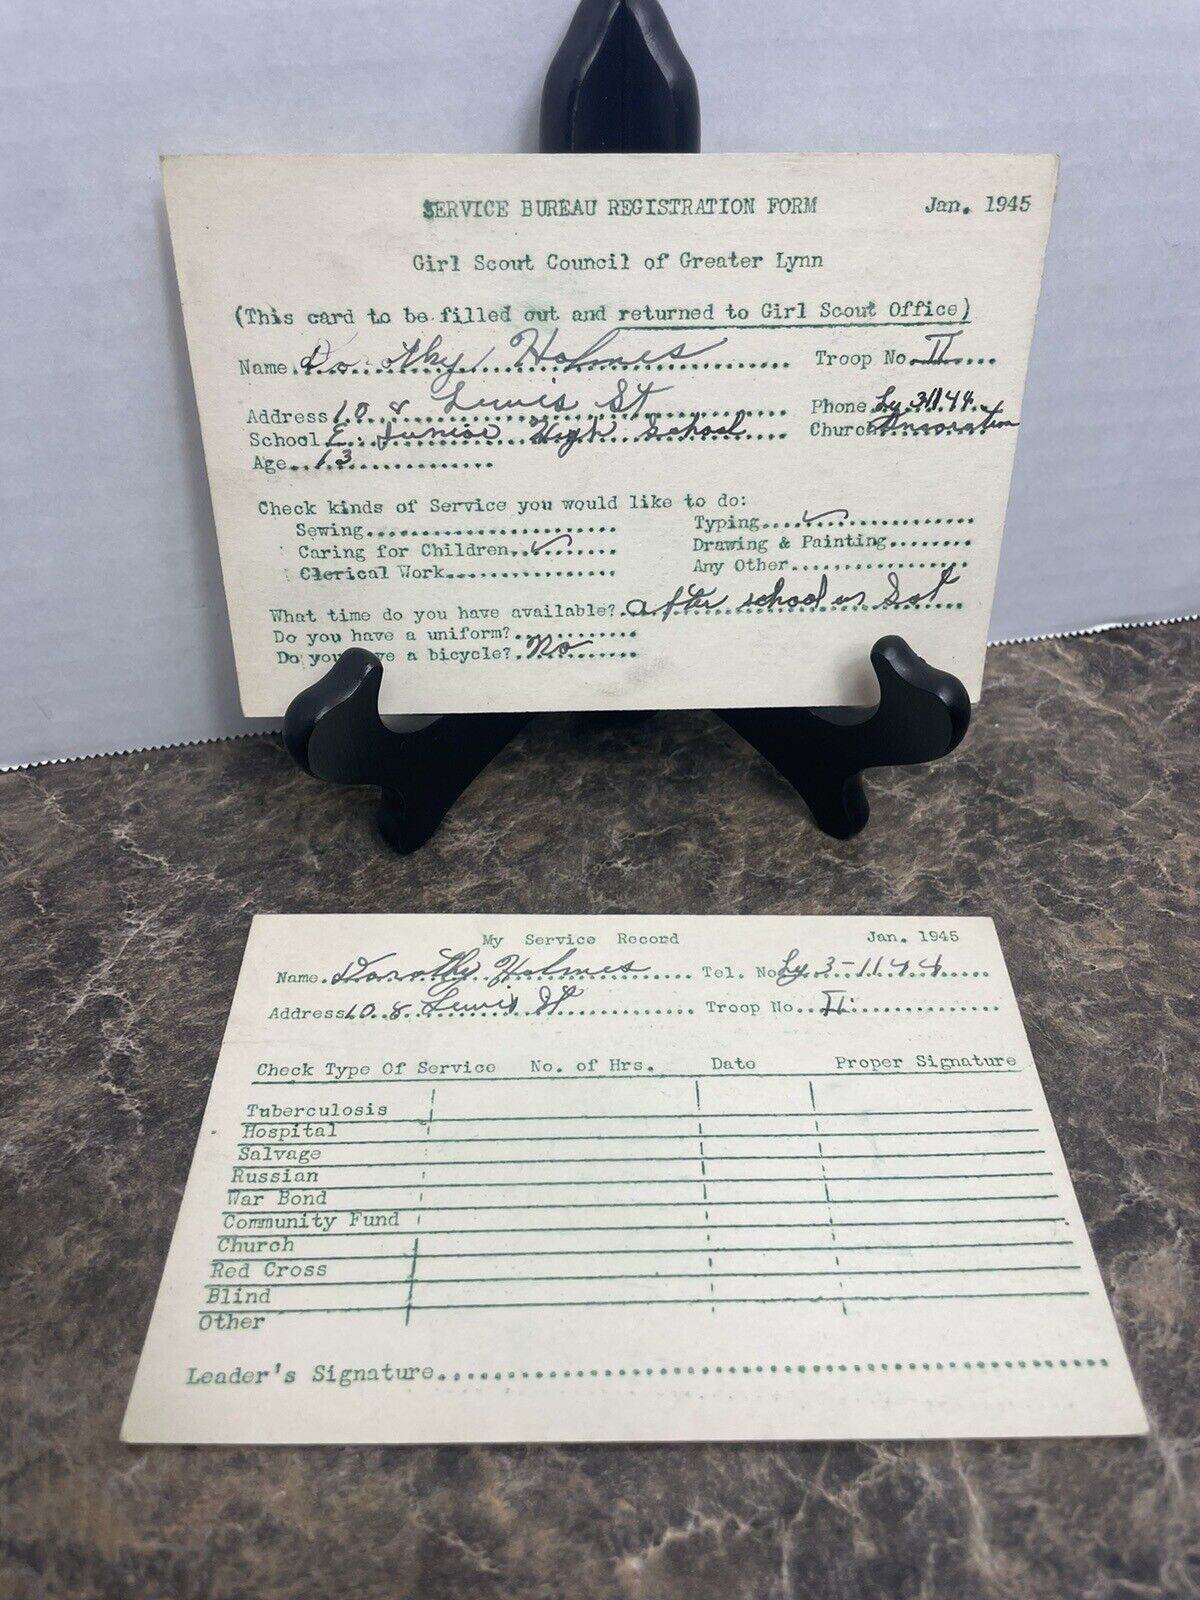 c1945 Girls Scouts Registration Form Girl Scouts of Greater Lynn Massachusetts